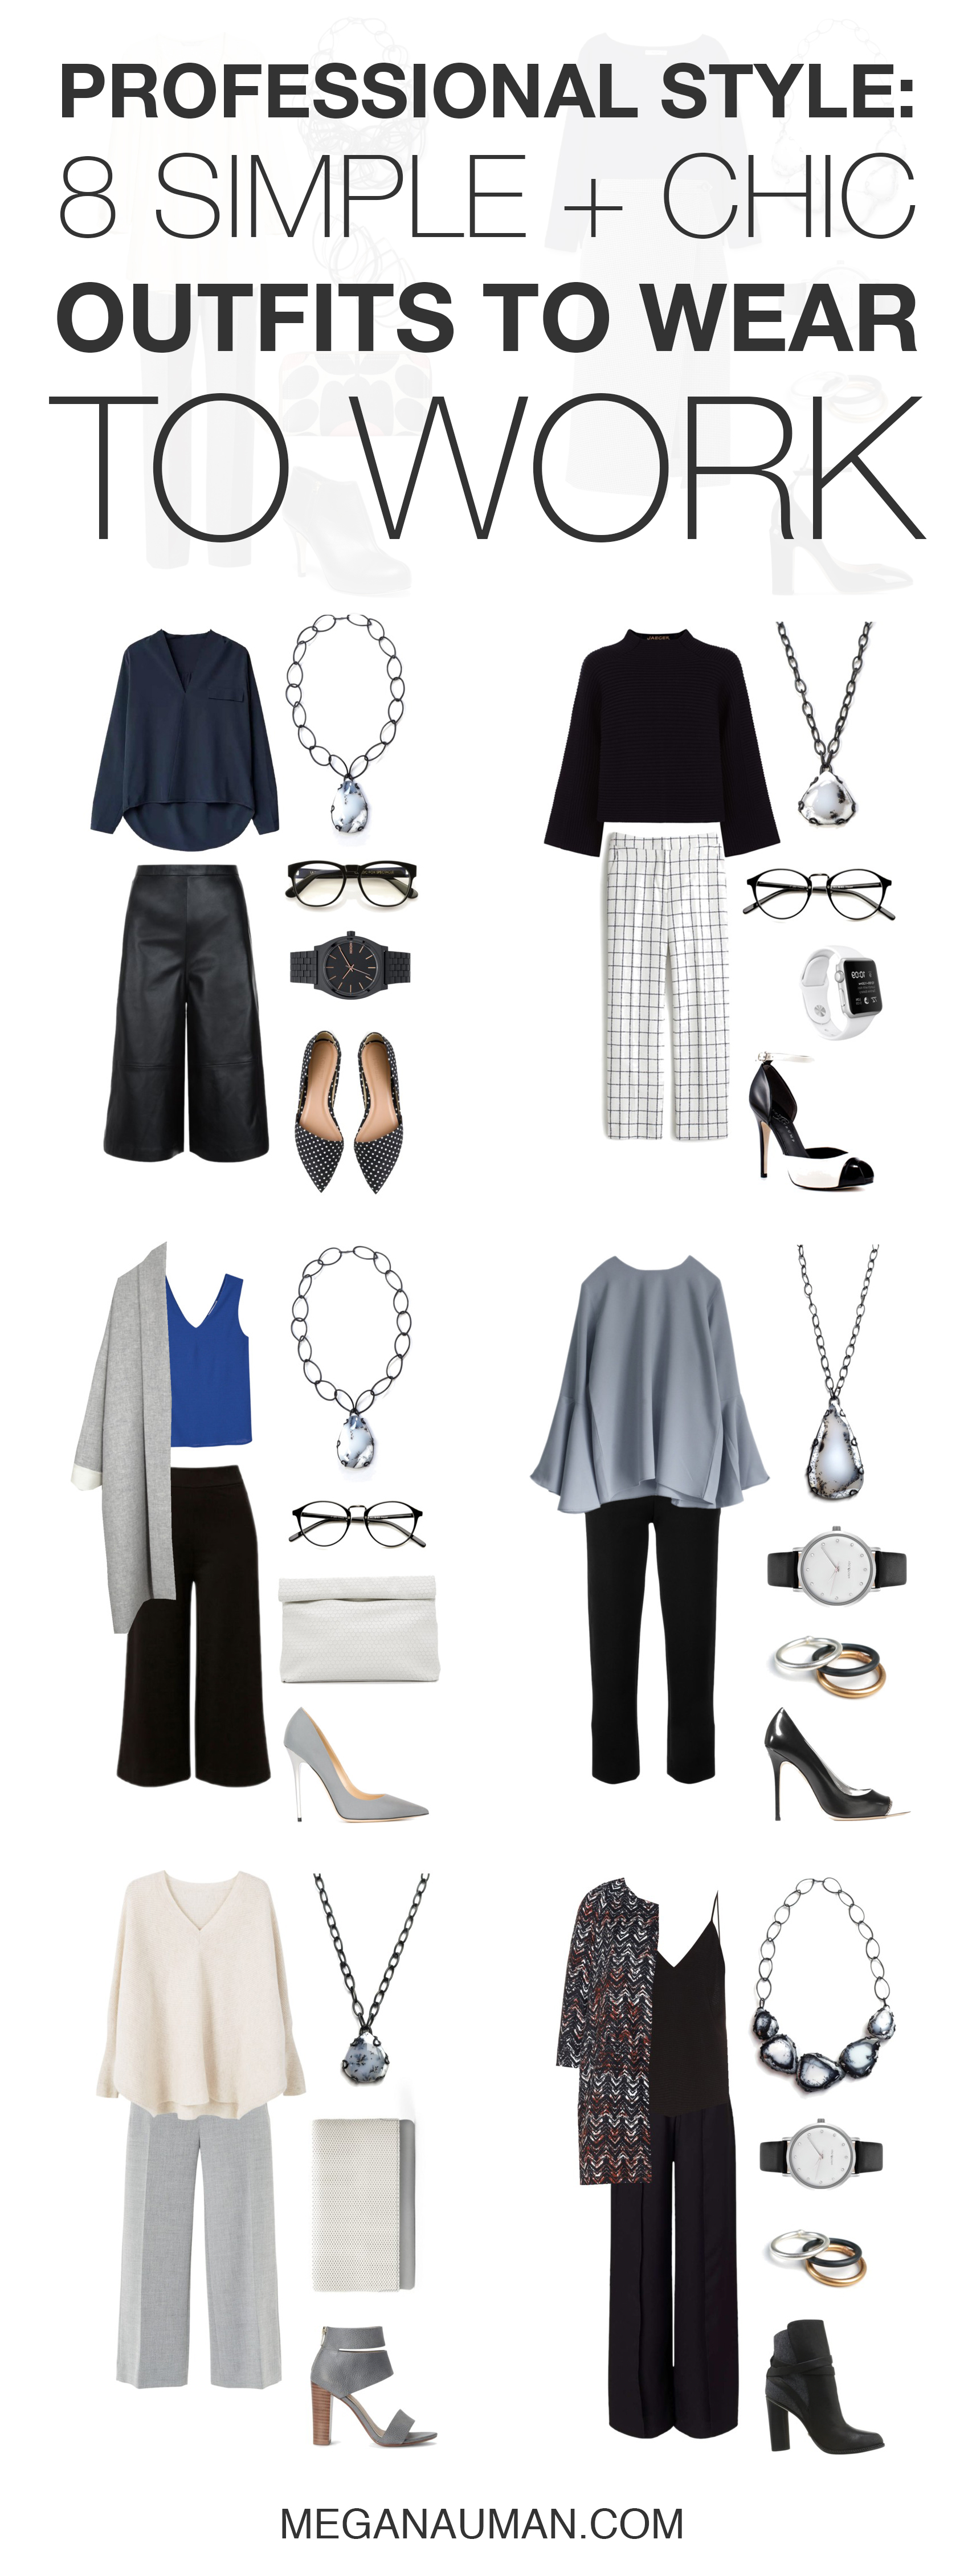 professional style: 8 simple and chic outfits to wear to work // click through for outfit details